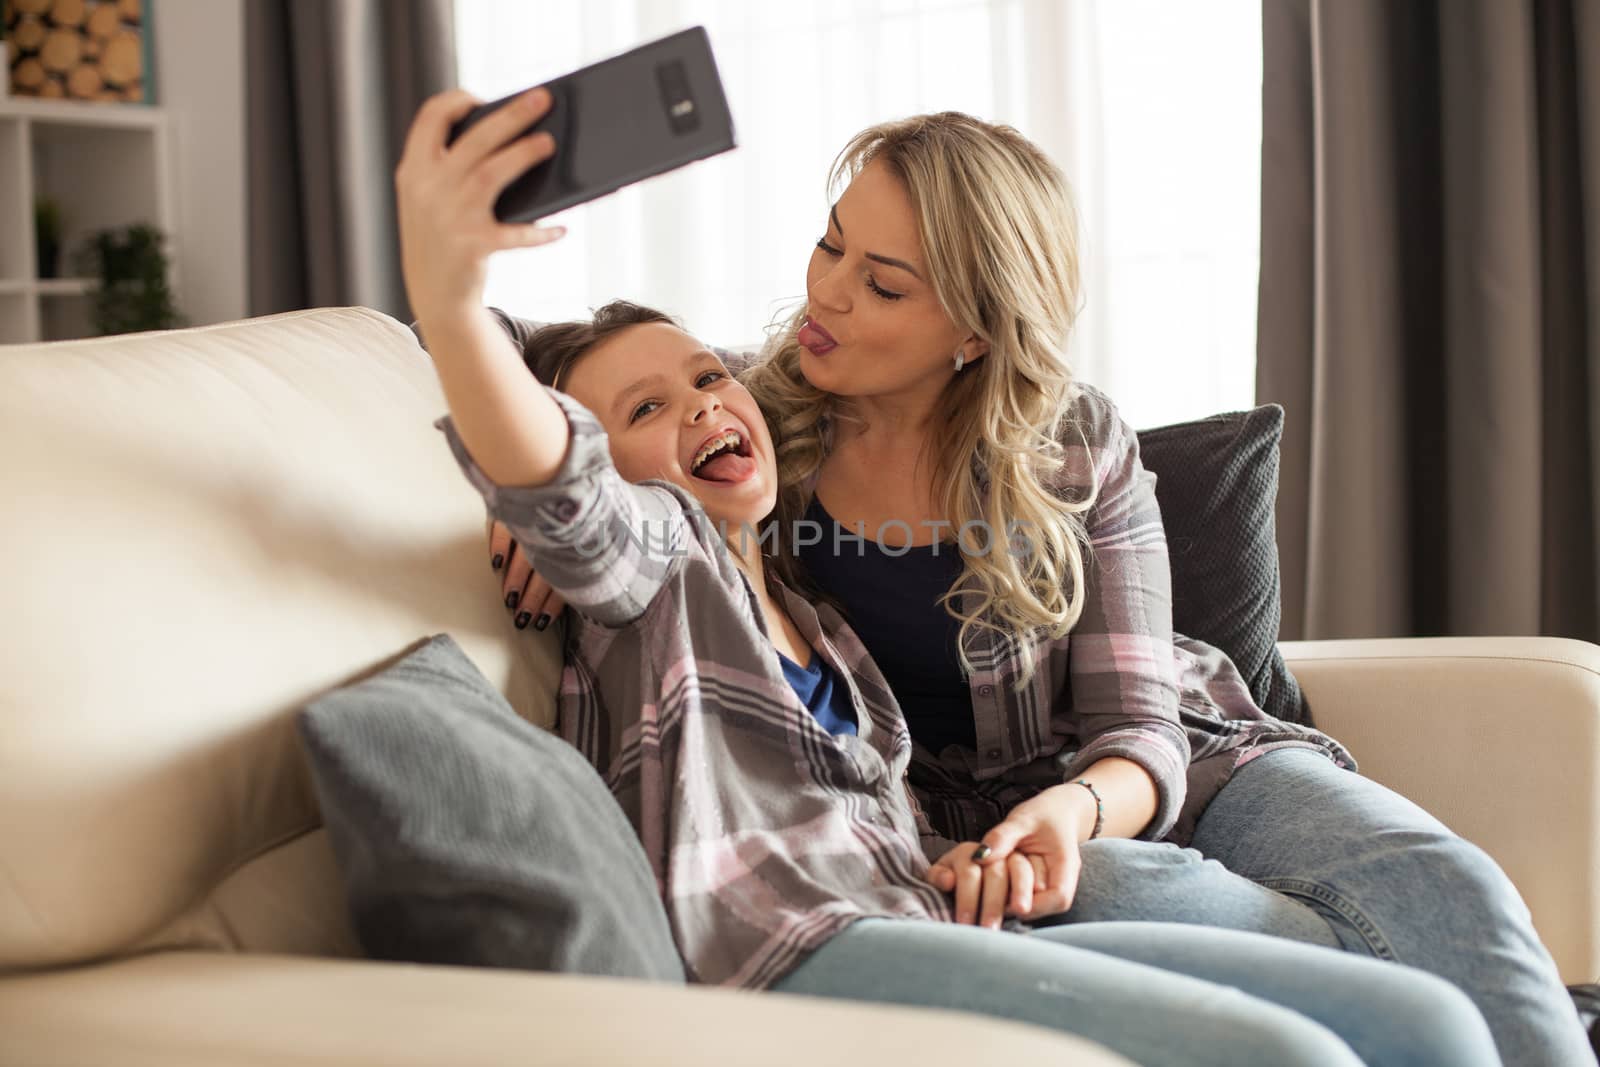 Cheerful mother and daughter sitting on the couch in living room taking a selfie together.